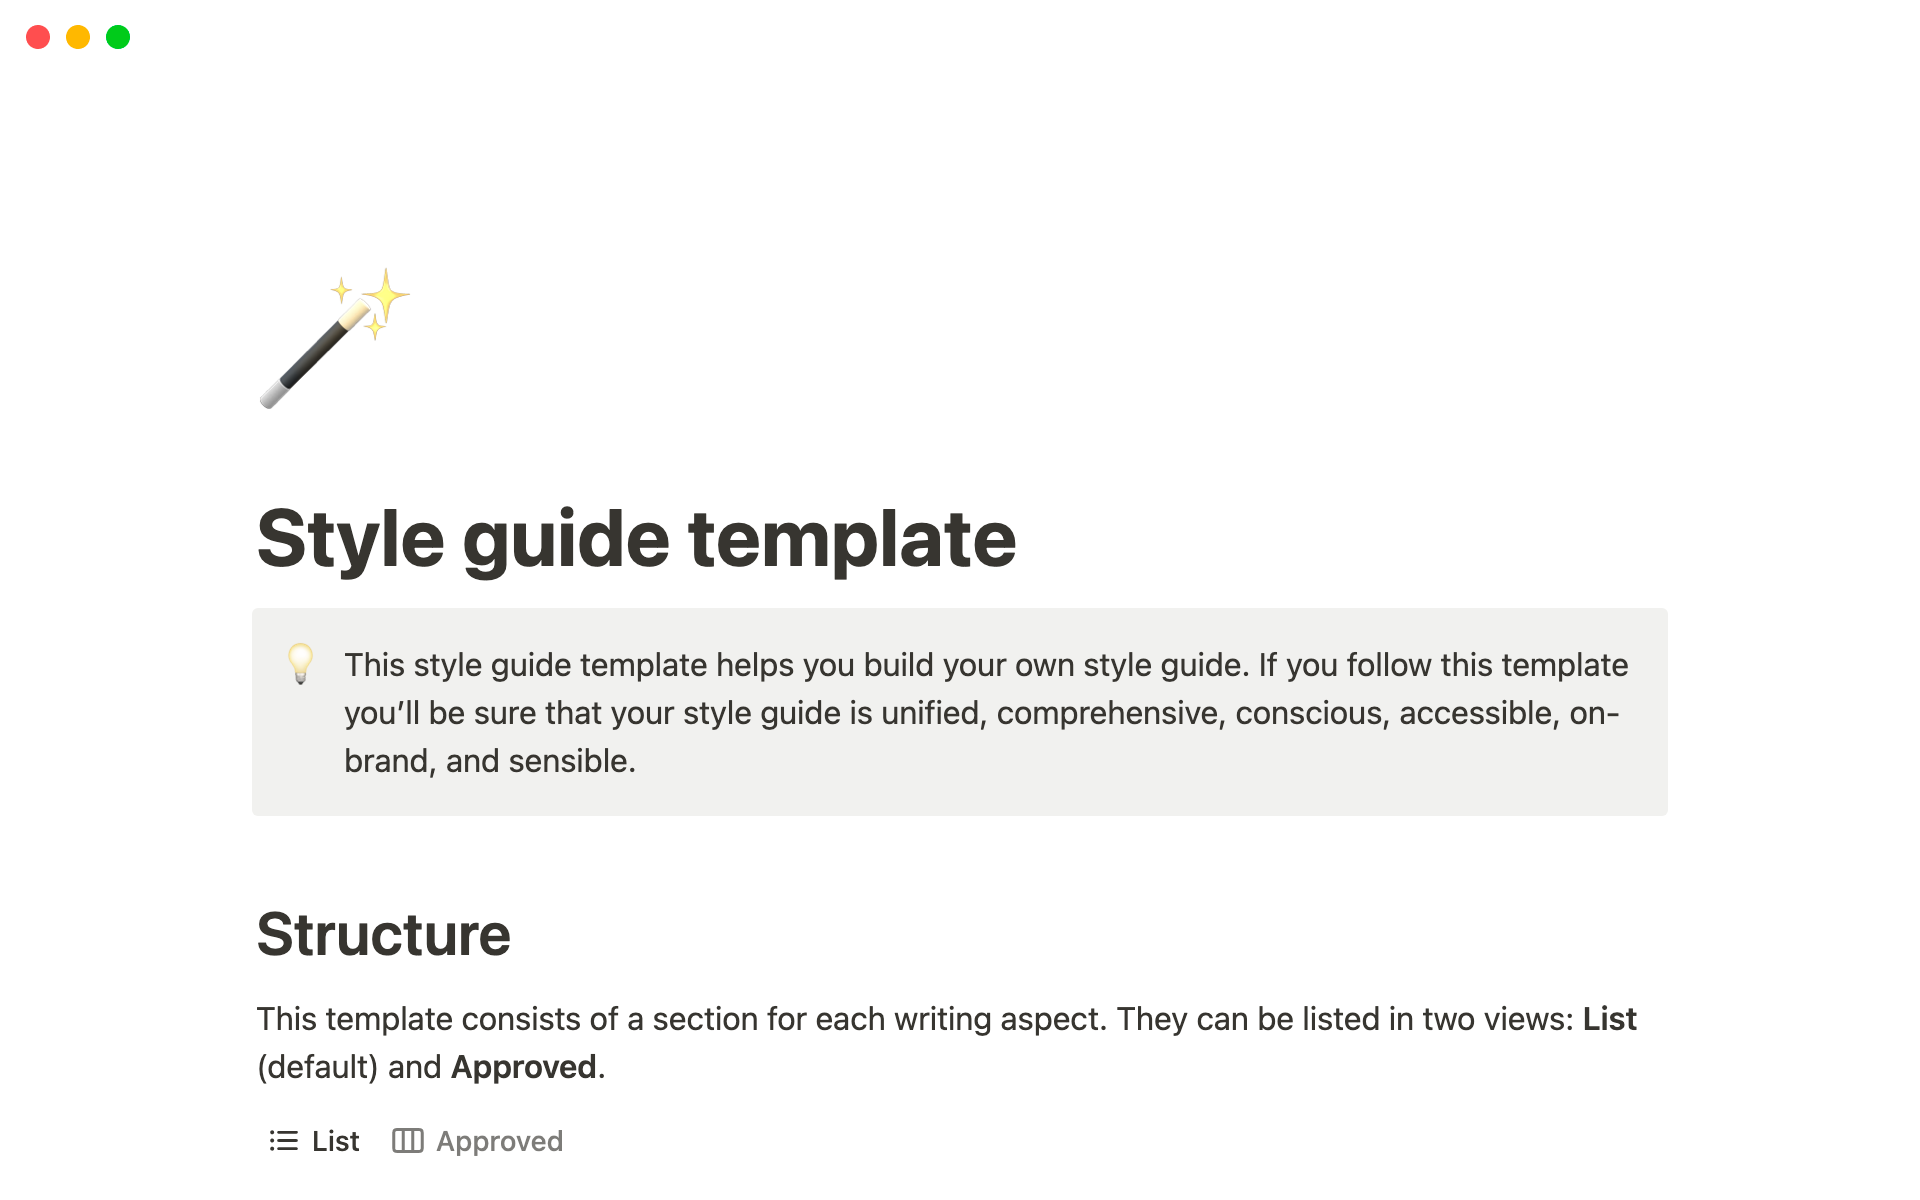 This style guide template helps you build your own style guide and share it with your content creators.